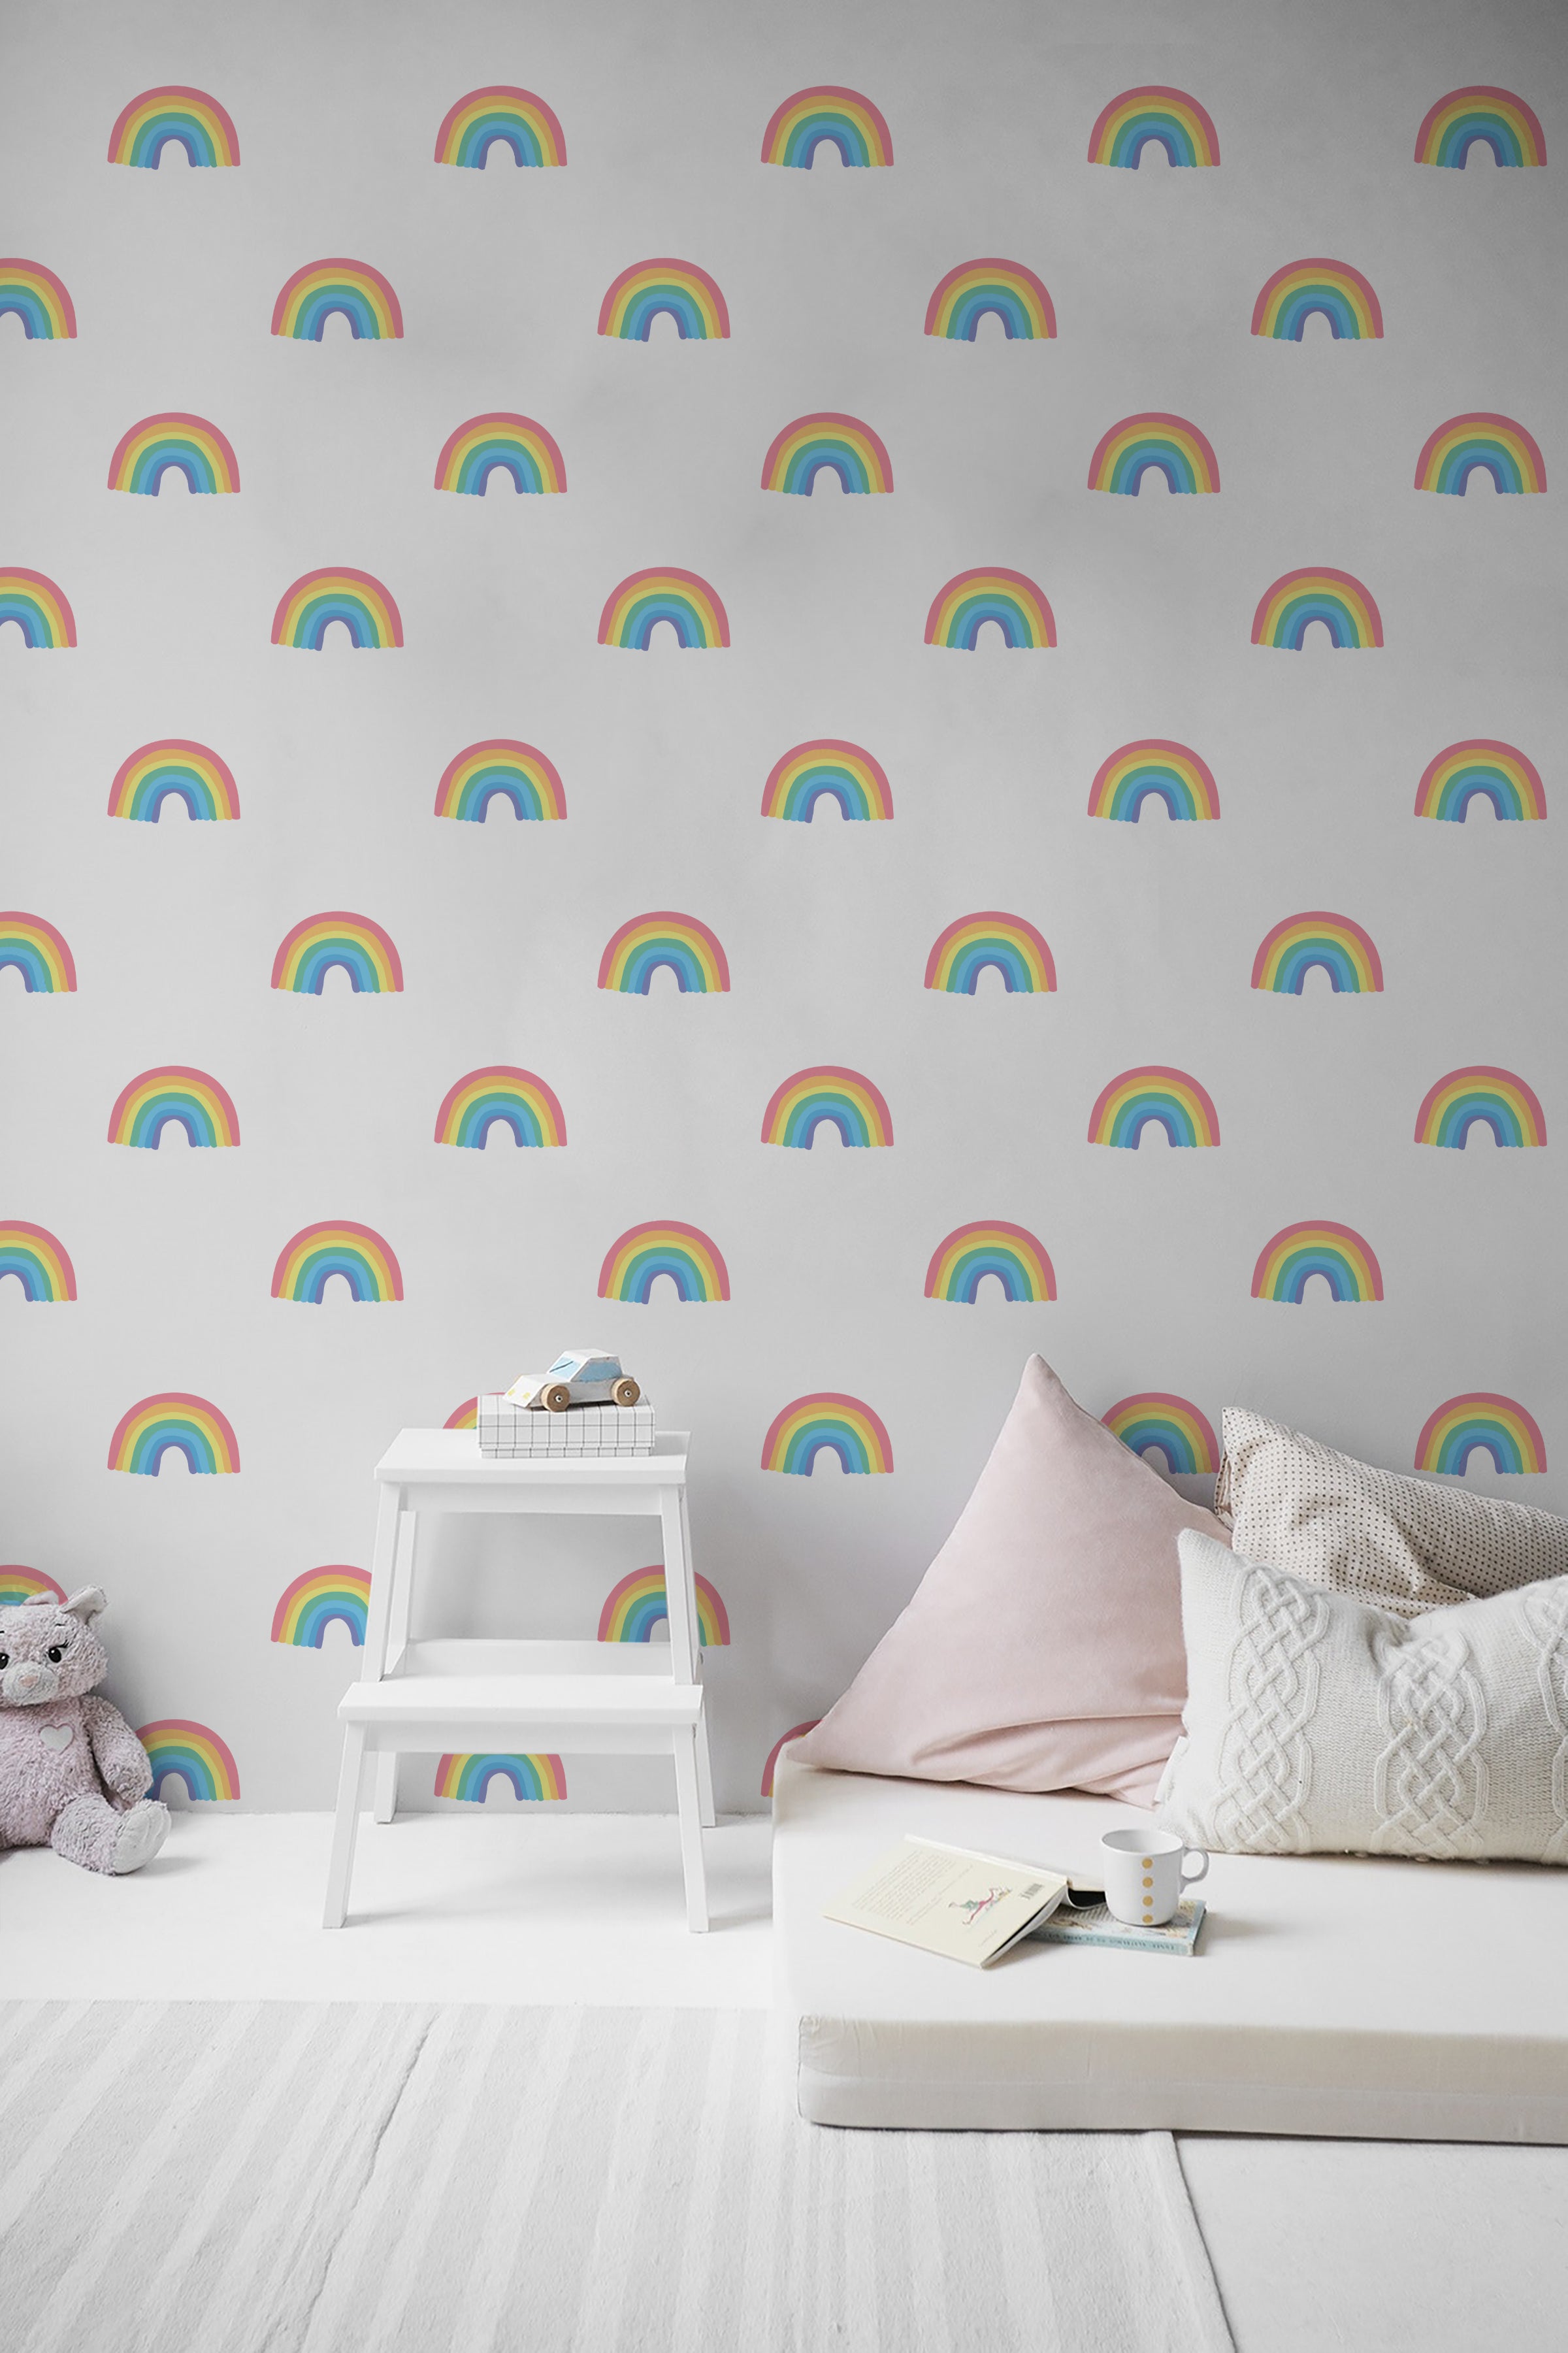 A playful child's room decorated with Chasing Rainbows wallpaper, featuring bright and colorful rainbow patterns on a light gray background. A small step stool, plush toys, and a comfortable couch with cushions complete the cozy setup.